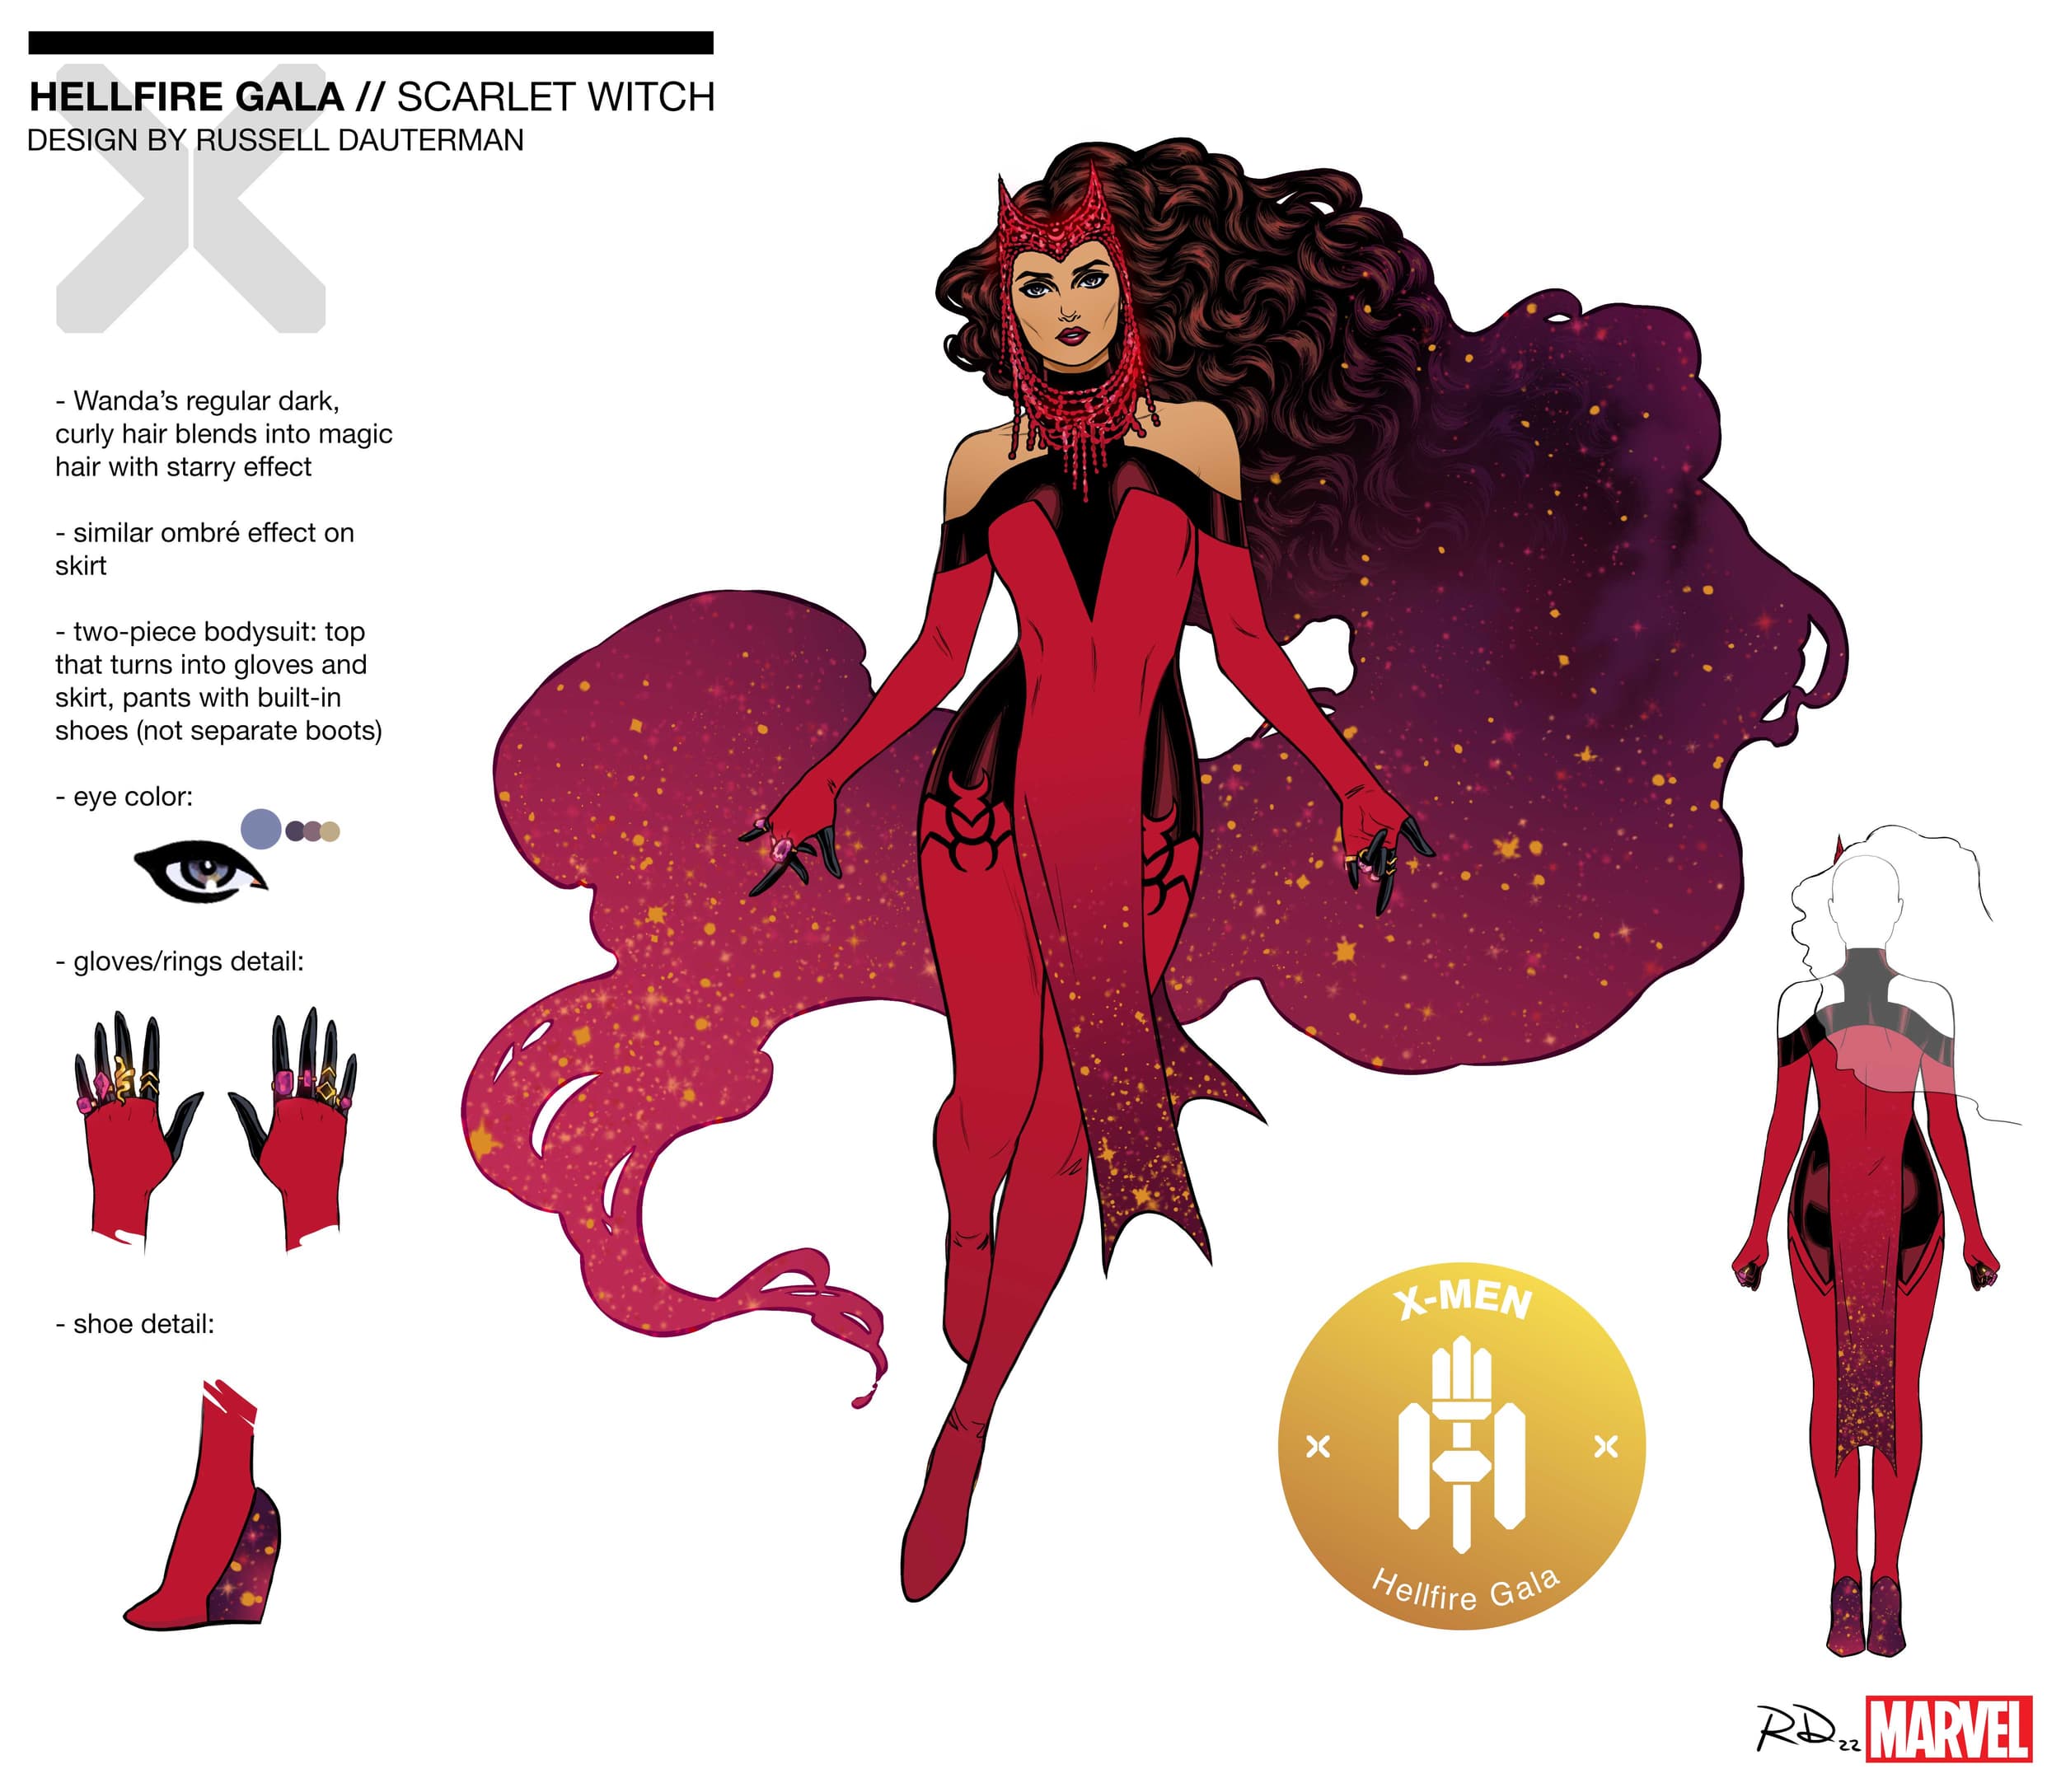 Scarlet Witch Hellfire Gala 2022 Design by Russell Dauterman